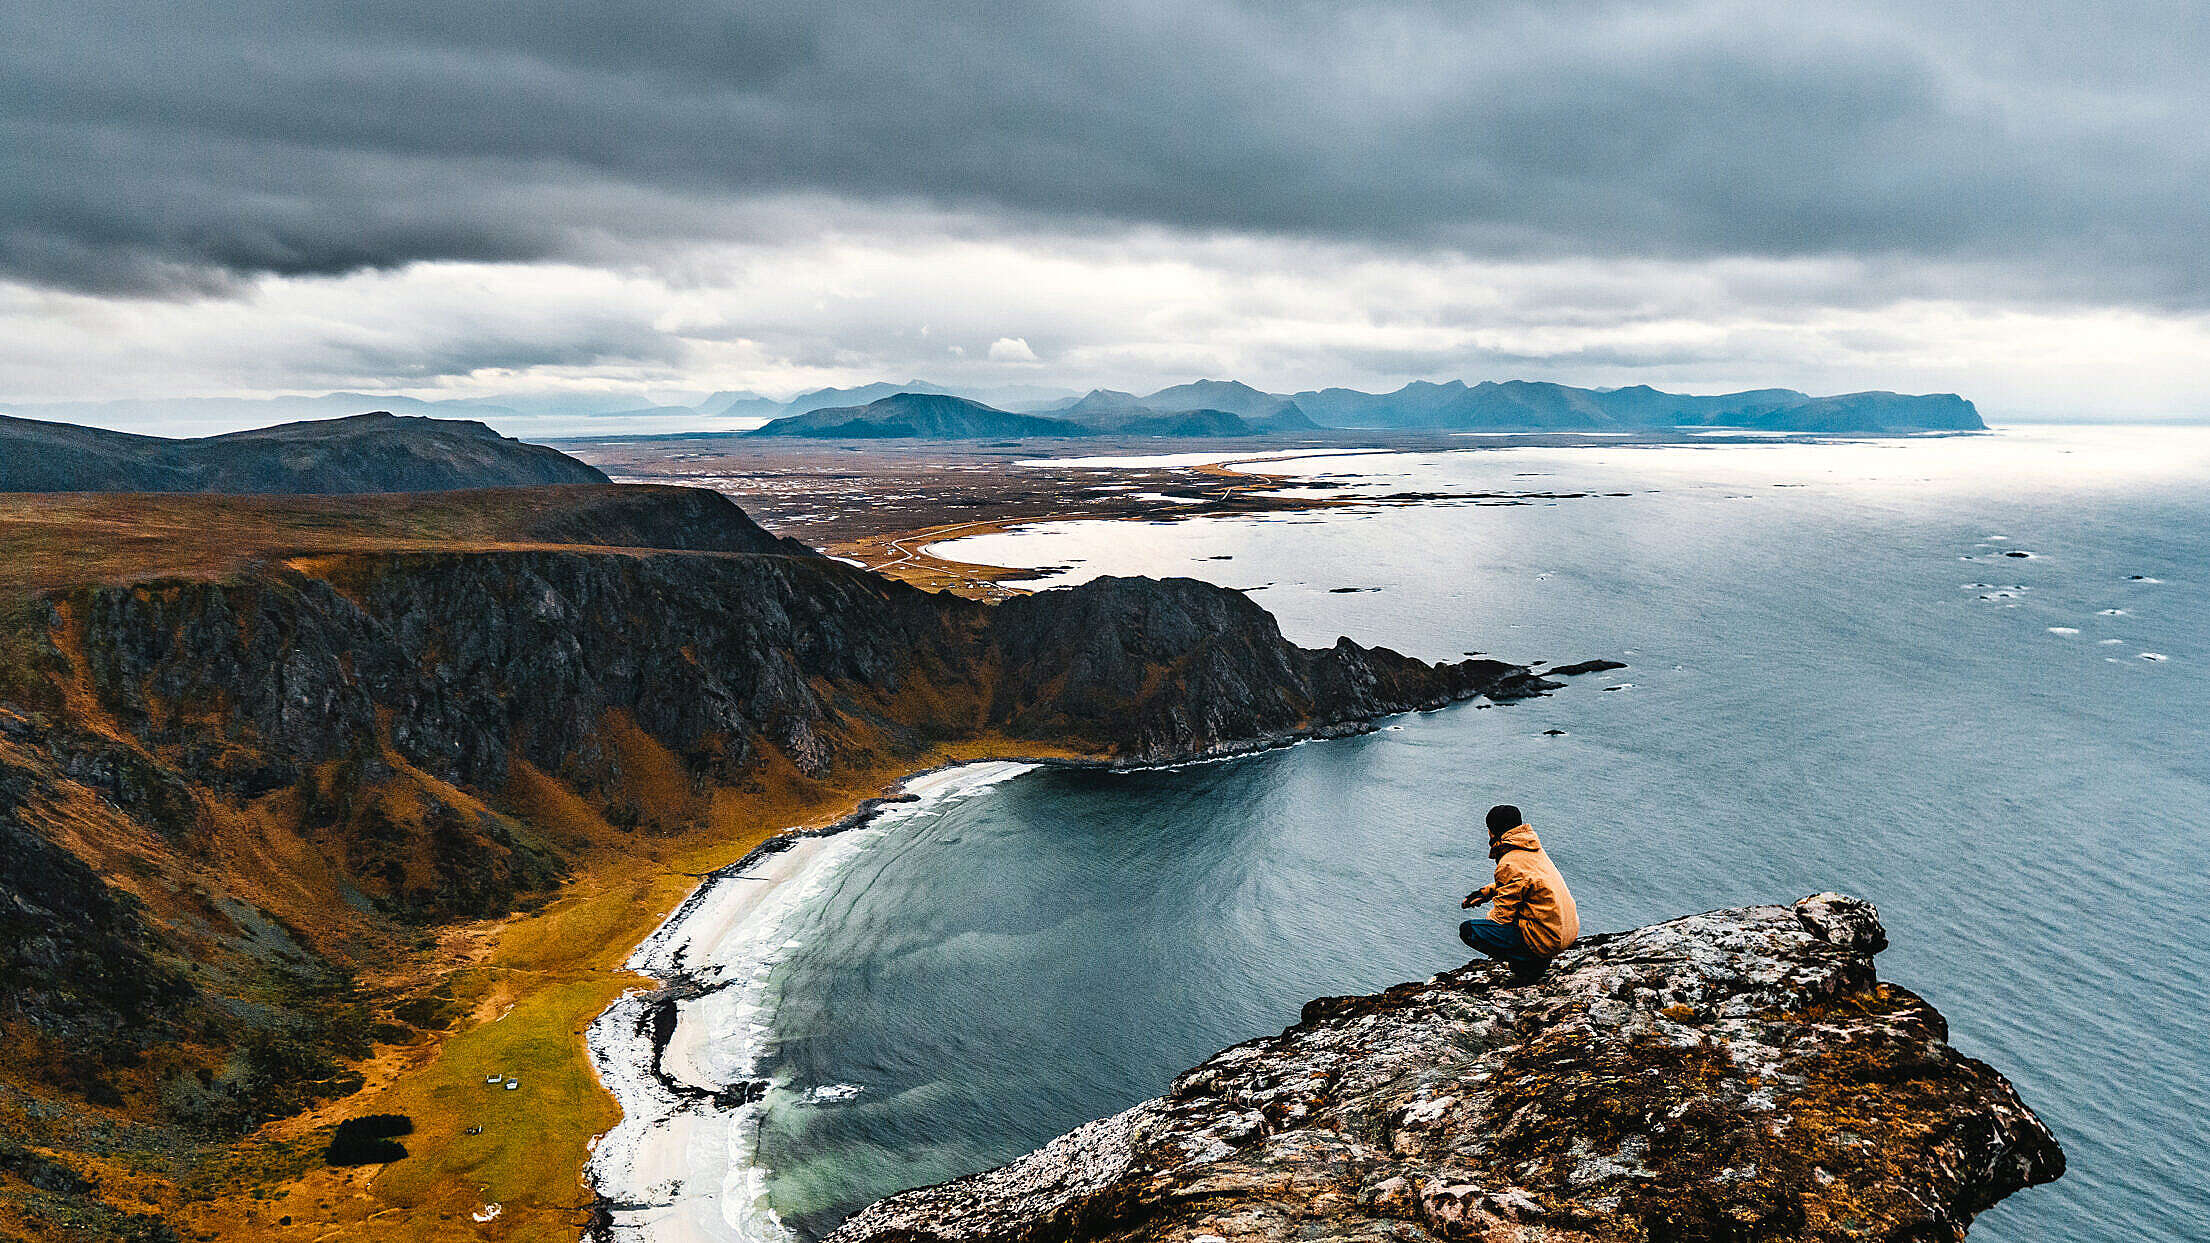 Man Enjoying a Moody View to the Norwegian Landscape Free Stock Photo